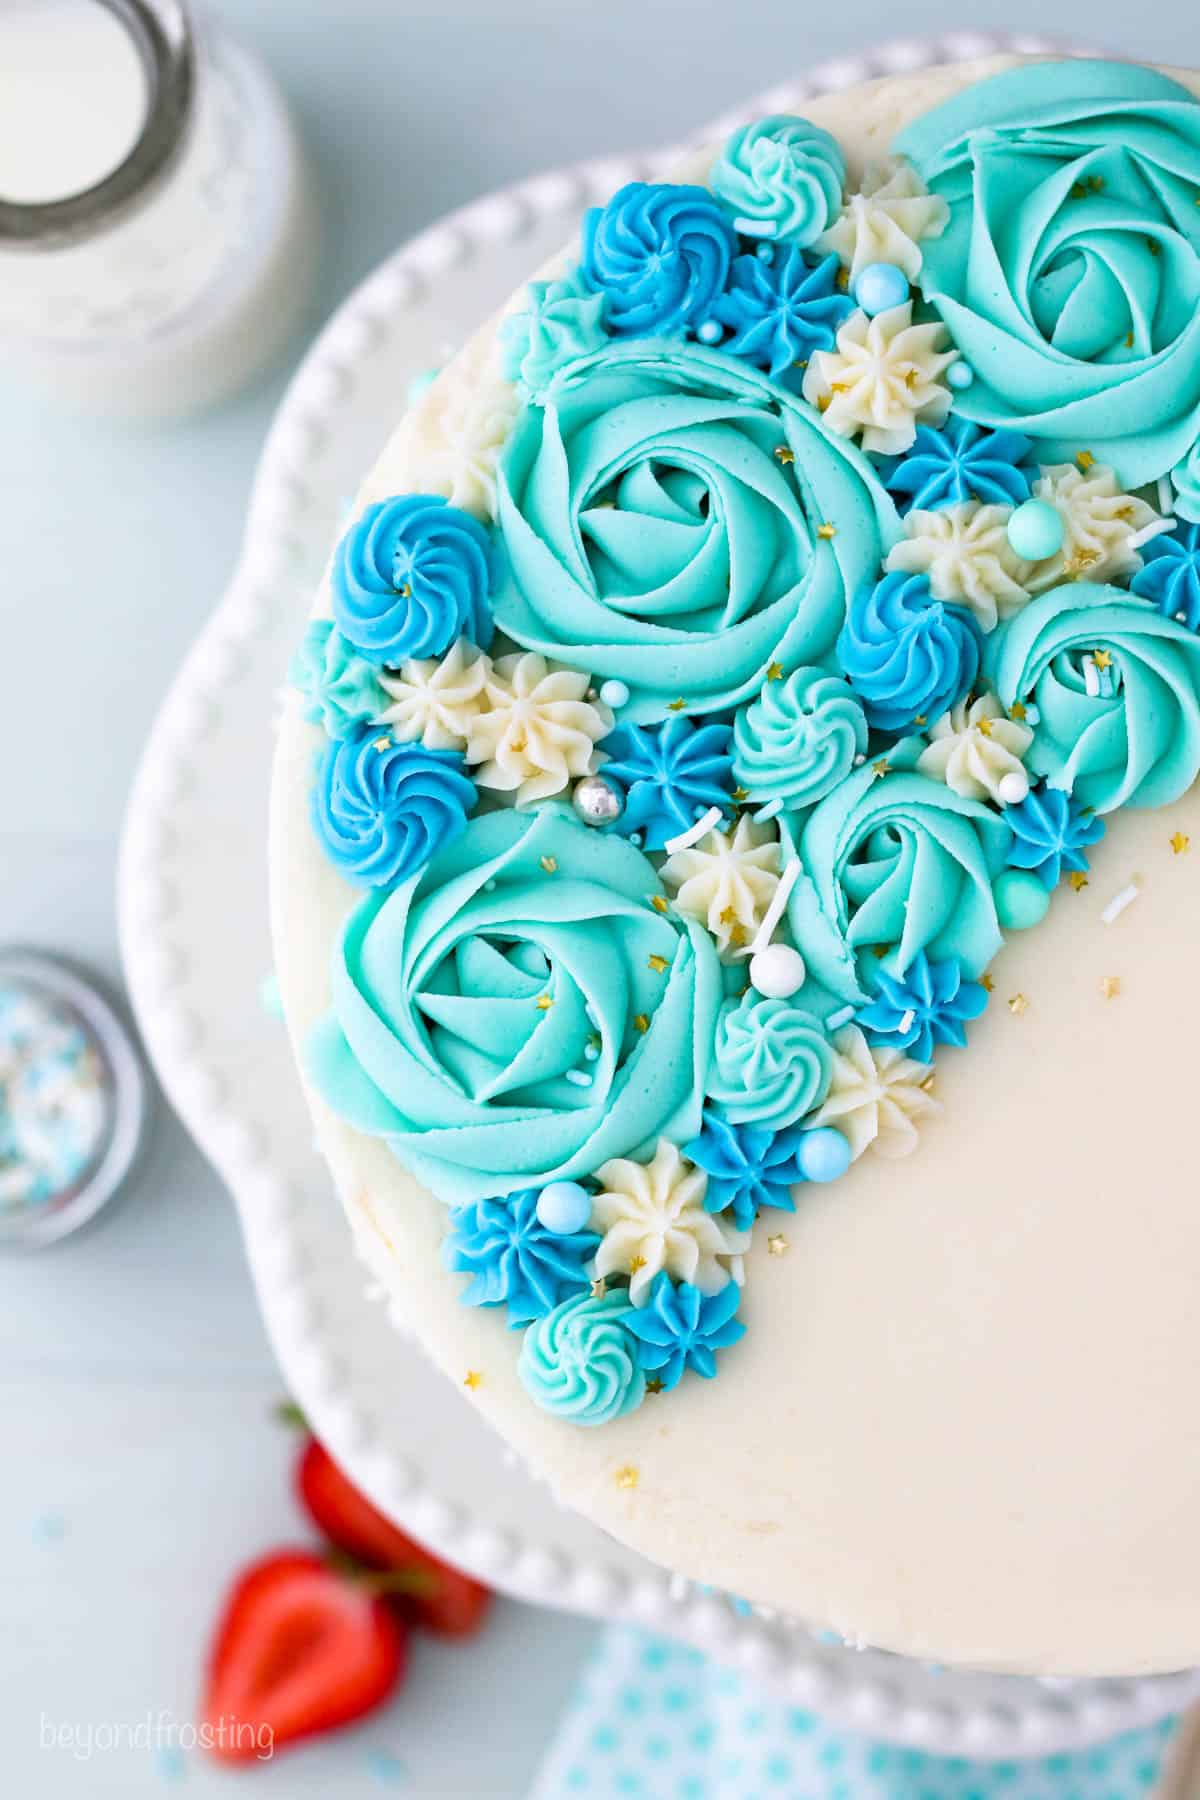 Overhead view of a cake decorated with blue and teal roses